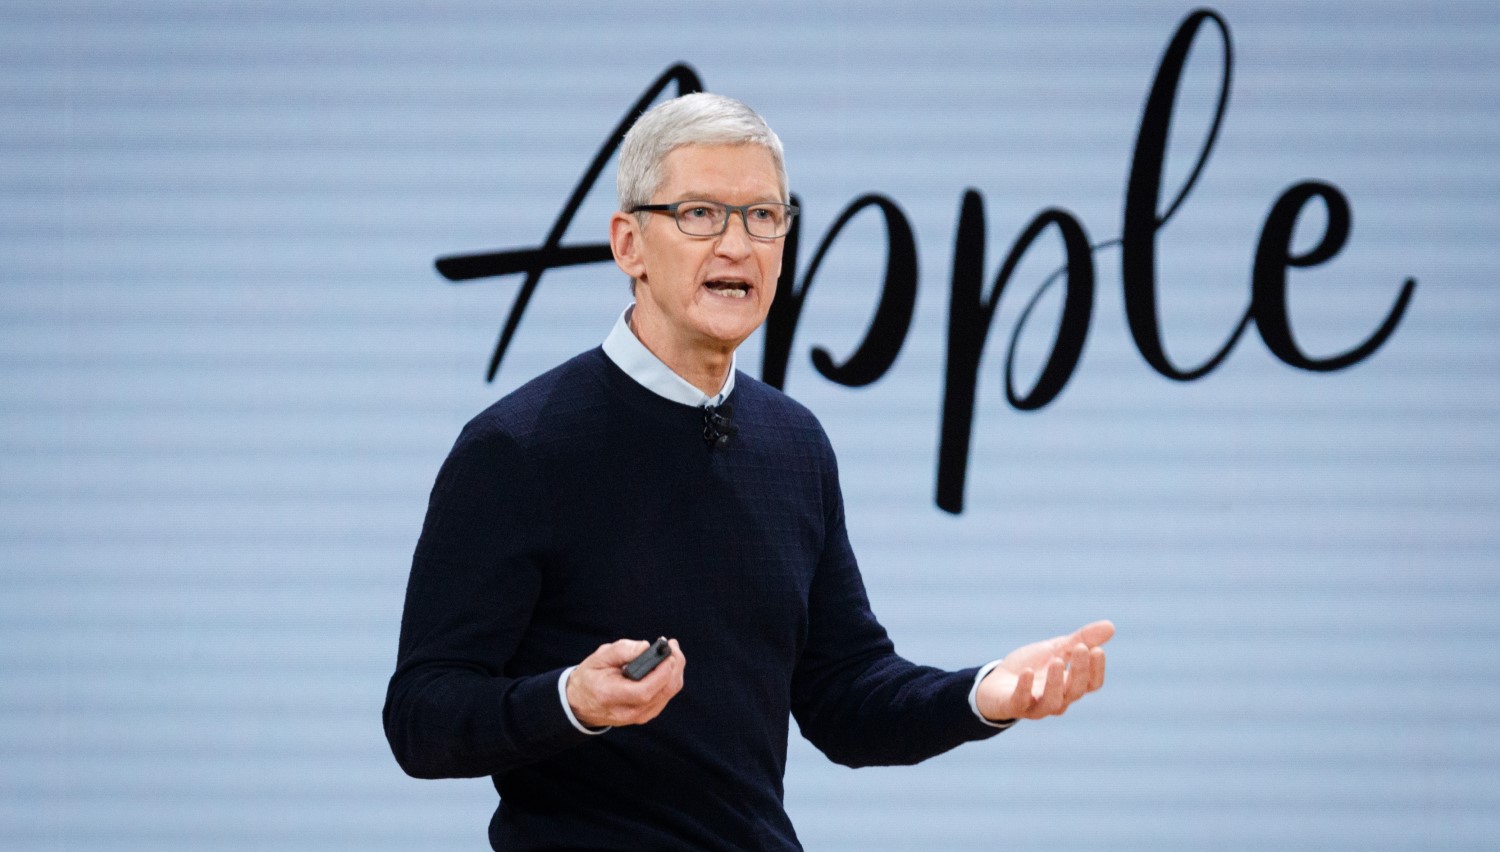 Issuing Money Is For Governments, Not Private Firms: Apple CEO